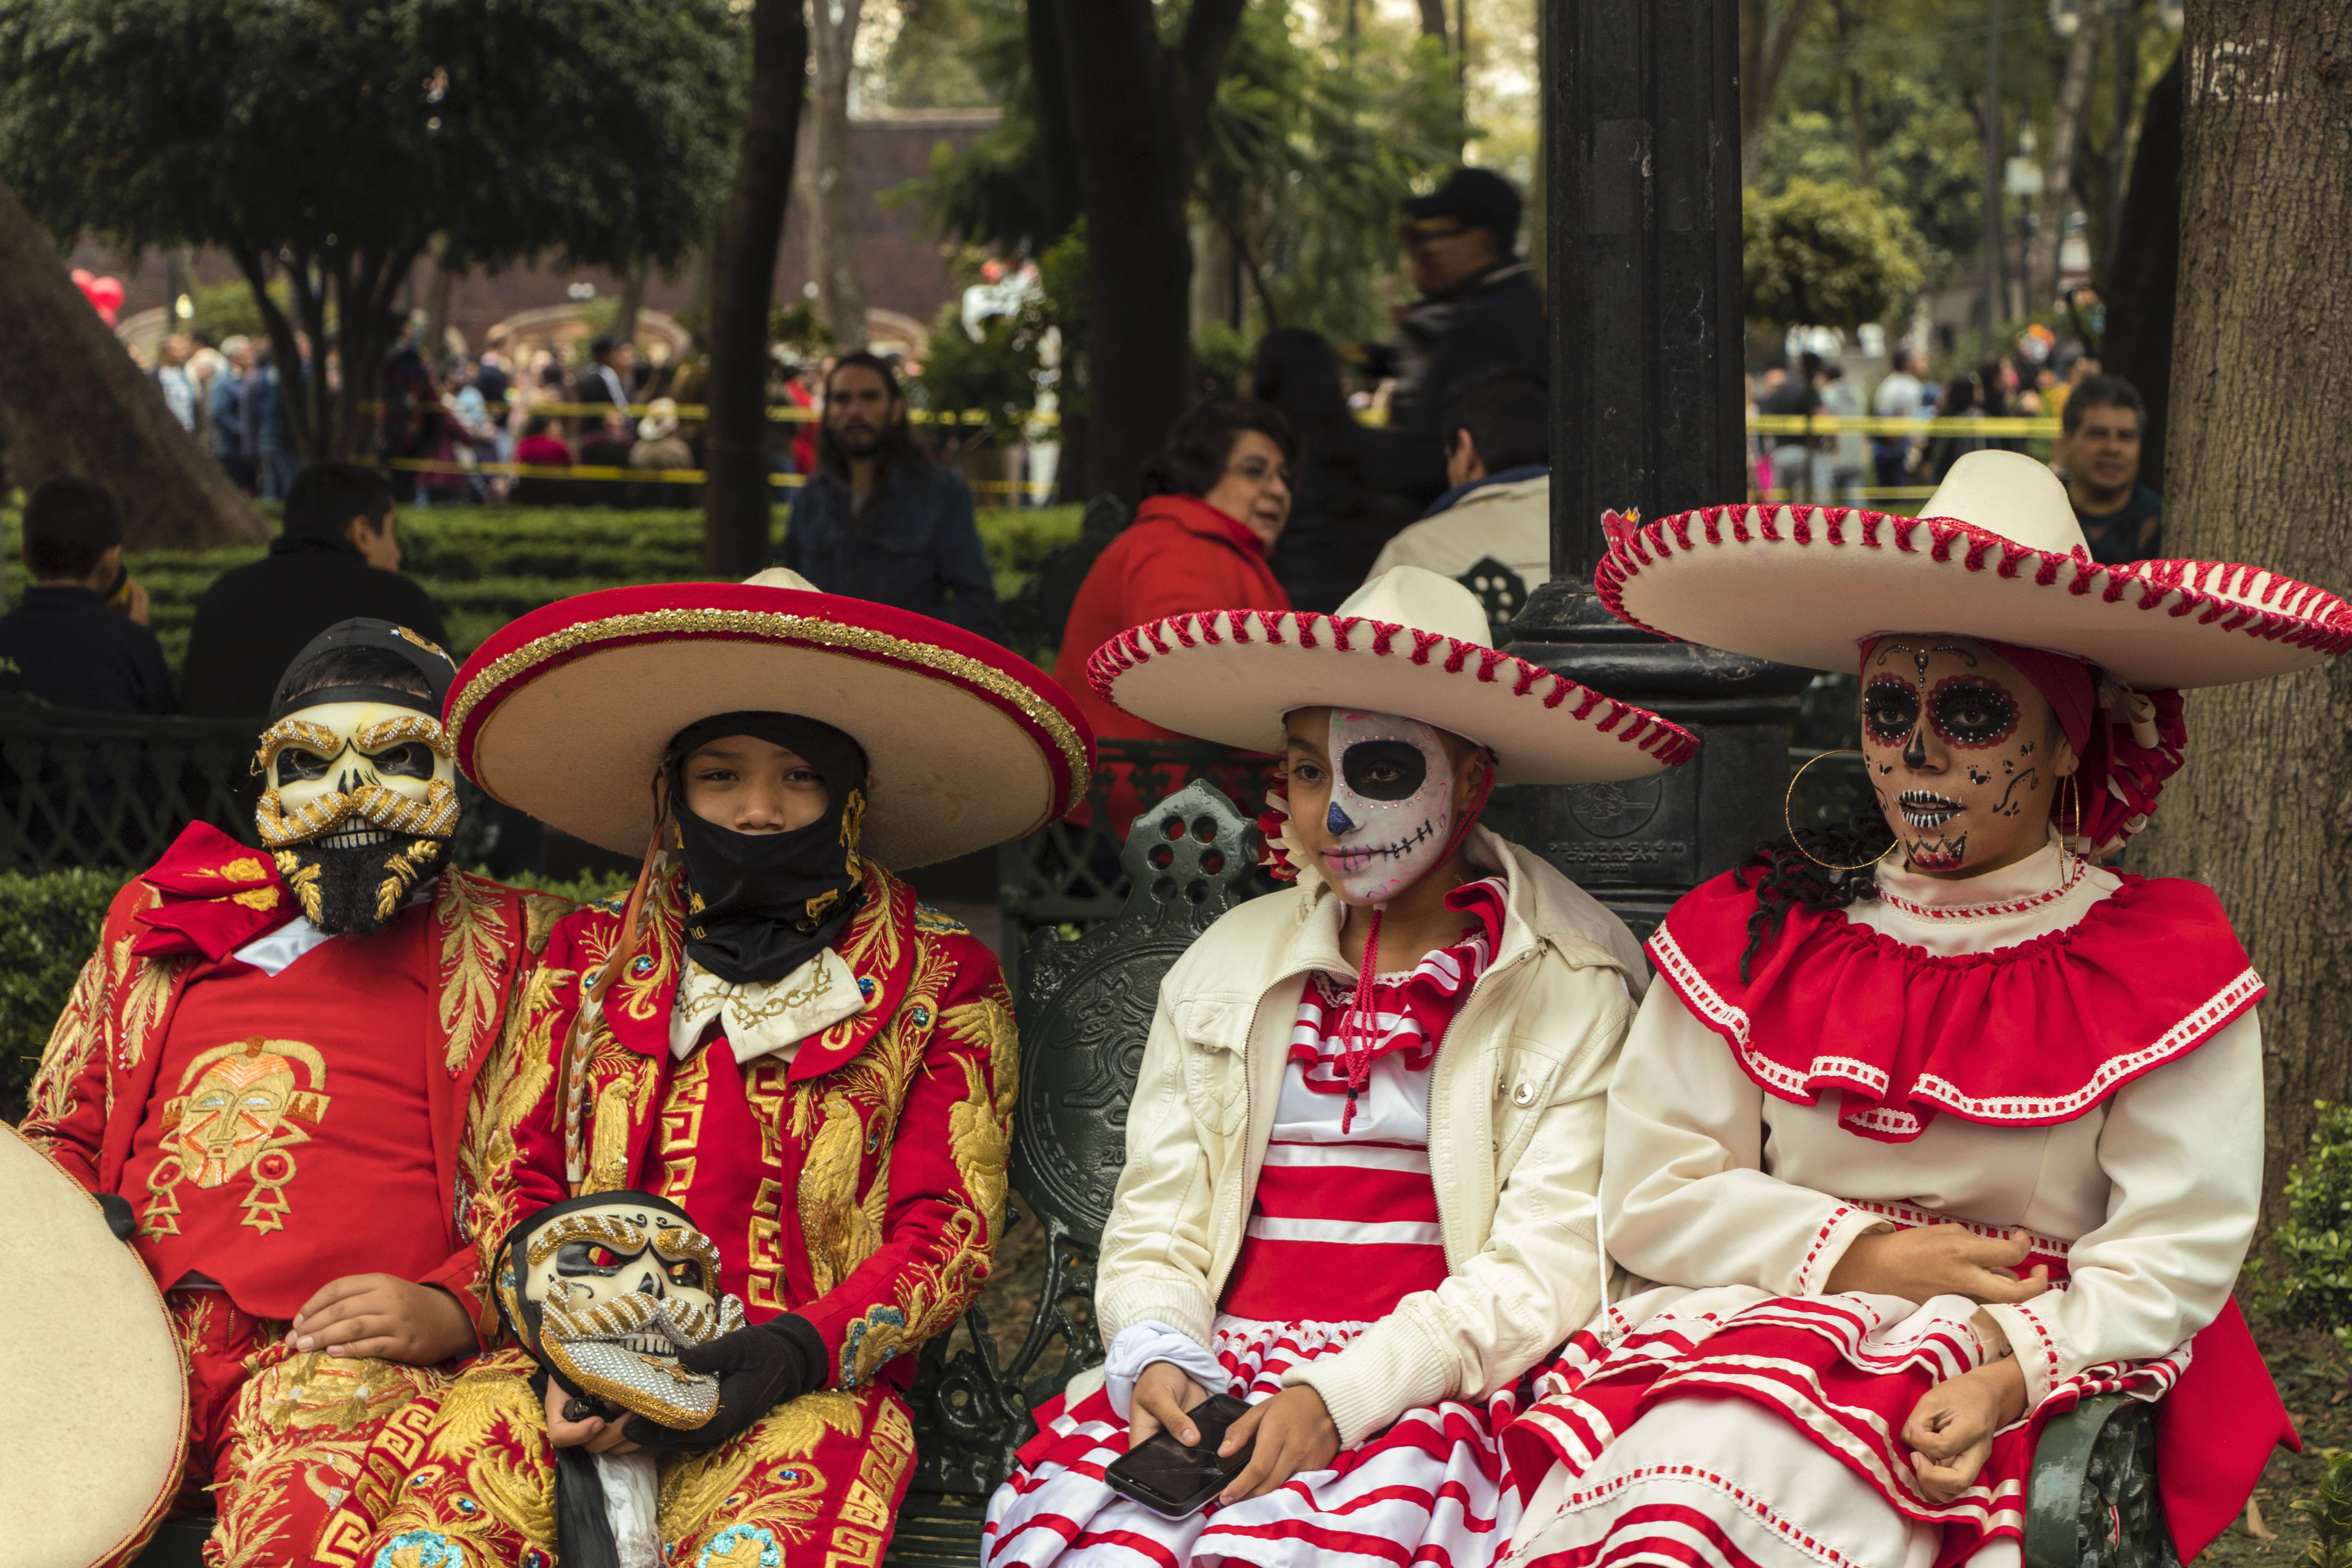 A family of Catrinas resting in park bench during Day of the Dead Festivities 